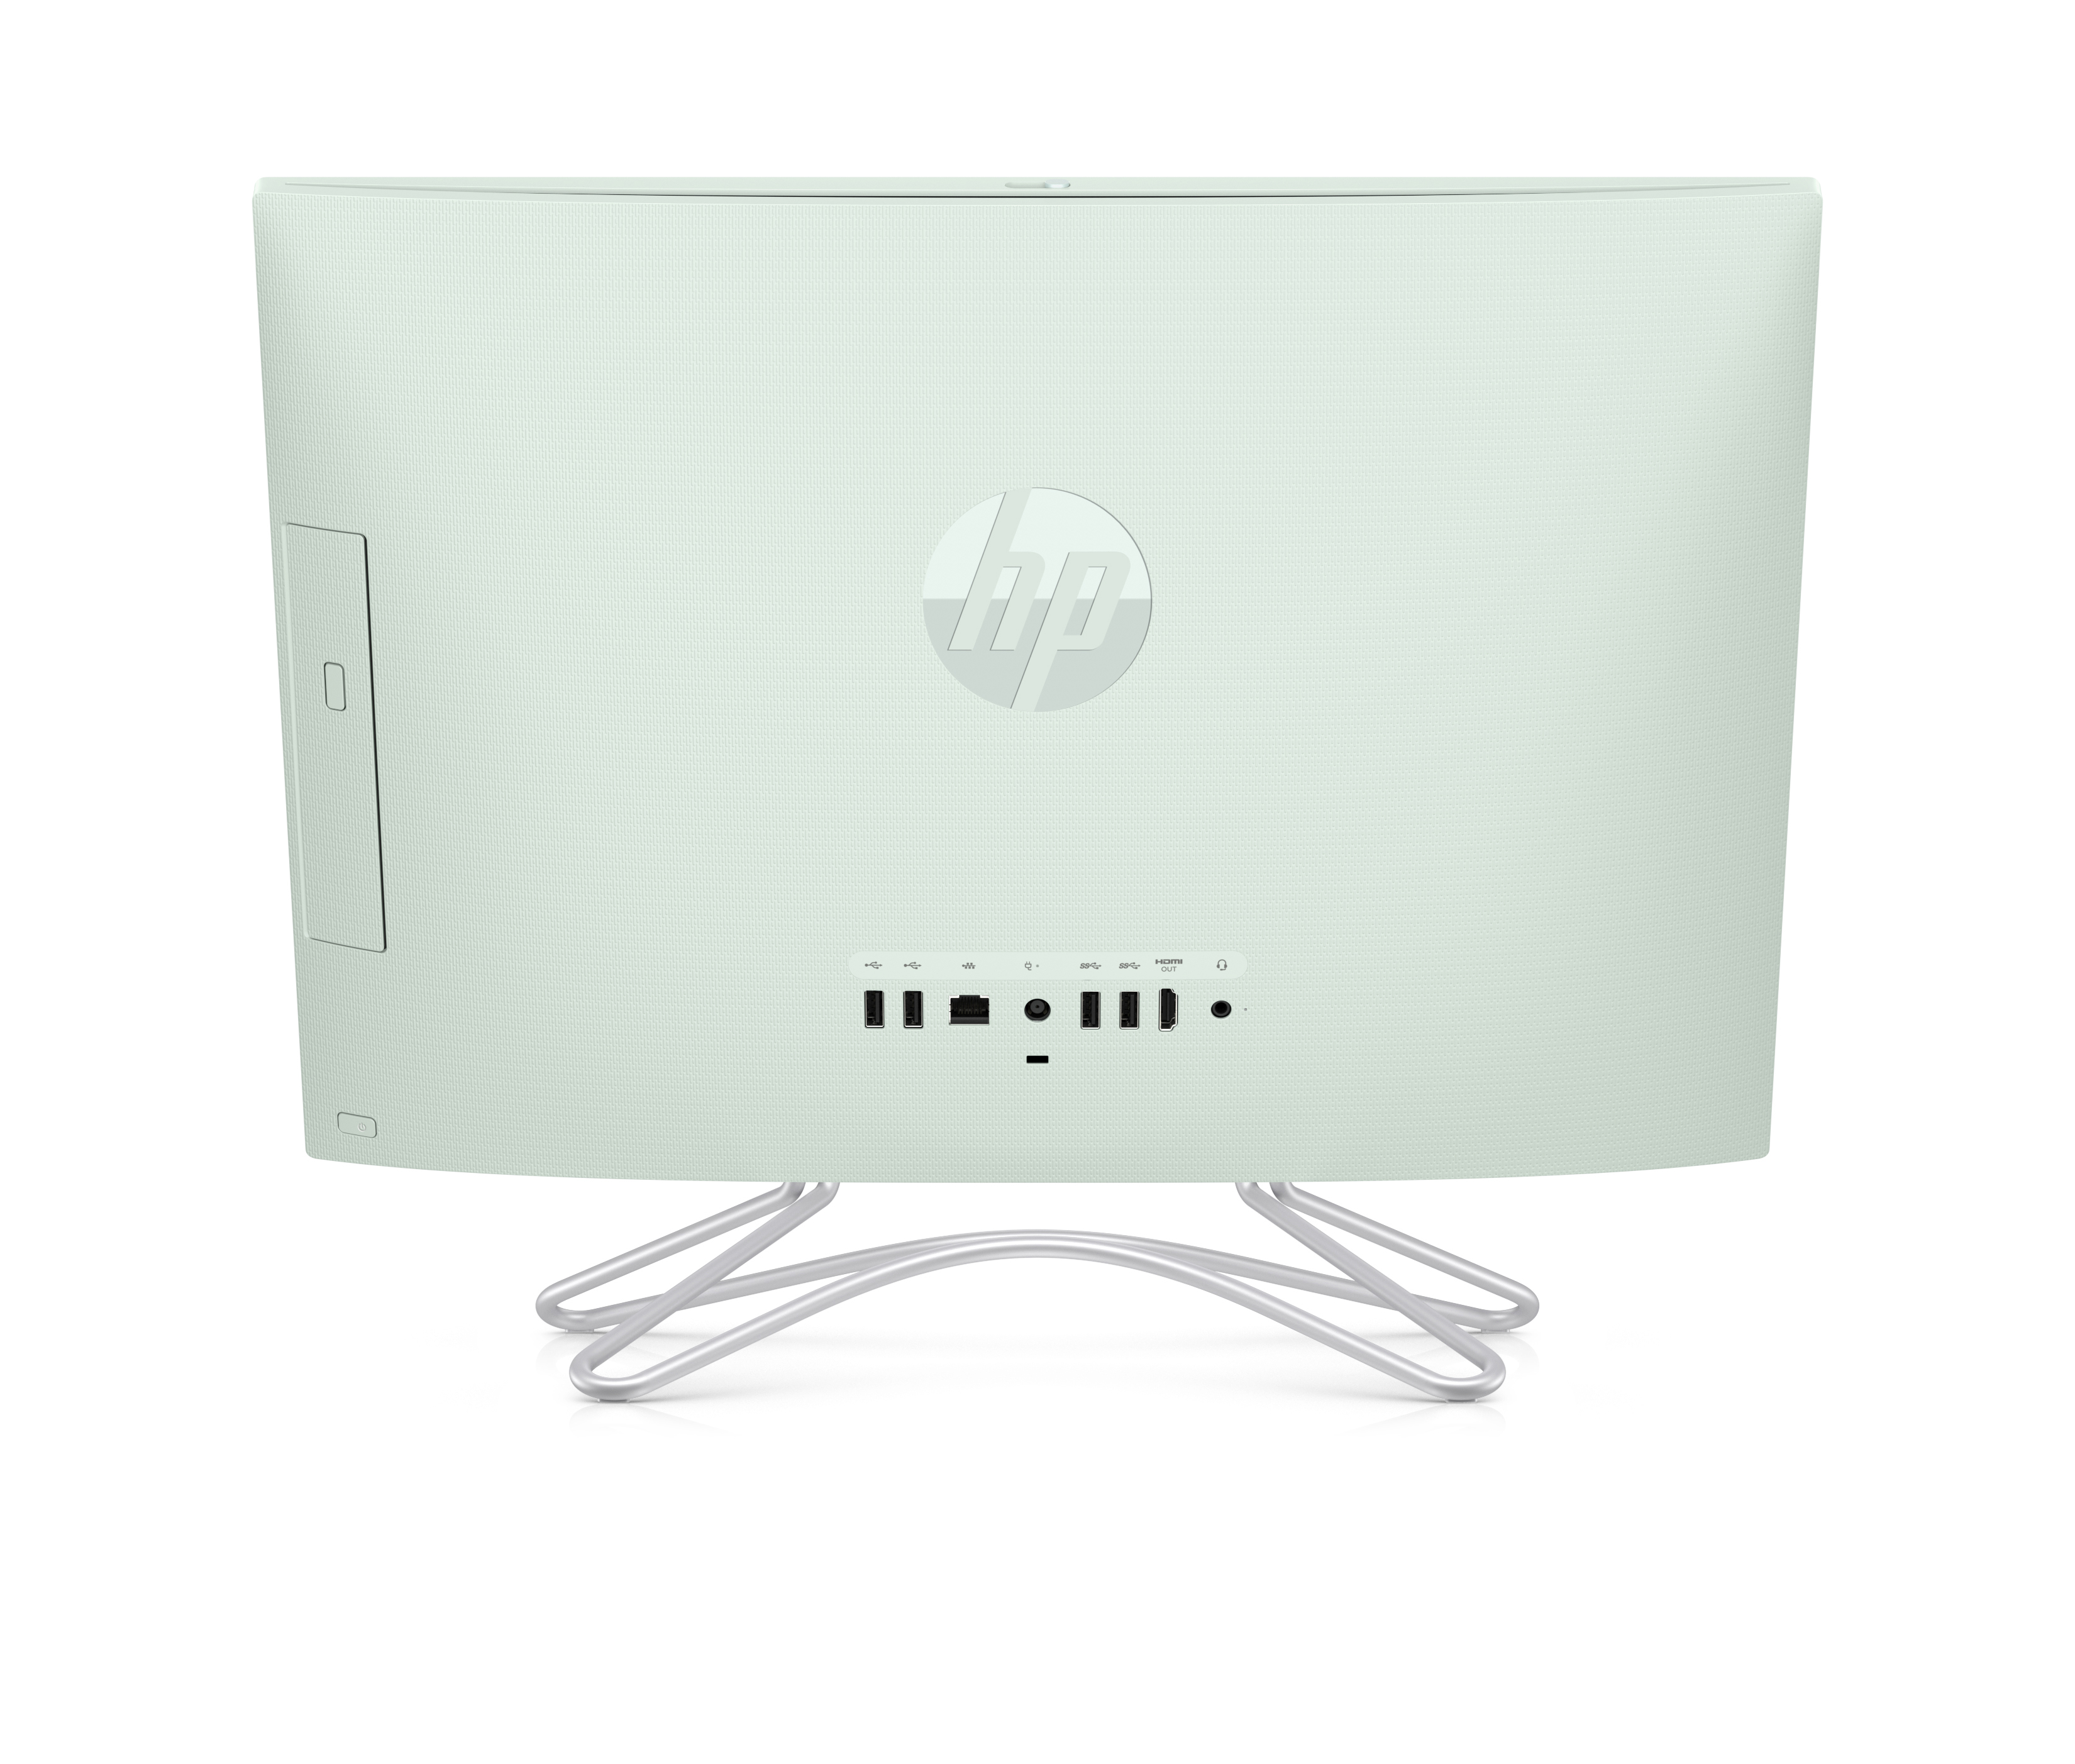 HP 22-c0073w All-in-One PC, 22" Display, Intel Celeron G4900T 2.9 GHz, 4GB RAM, 1TB HDD - image 5 of 5